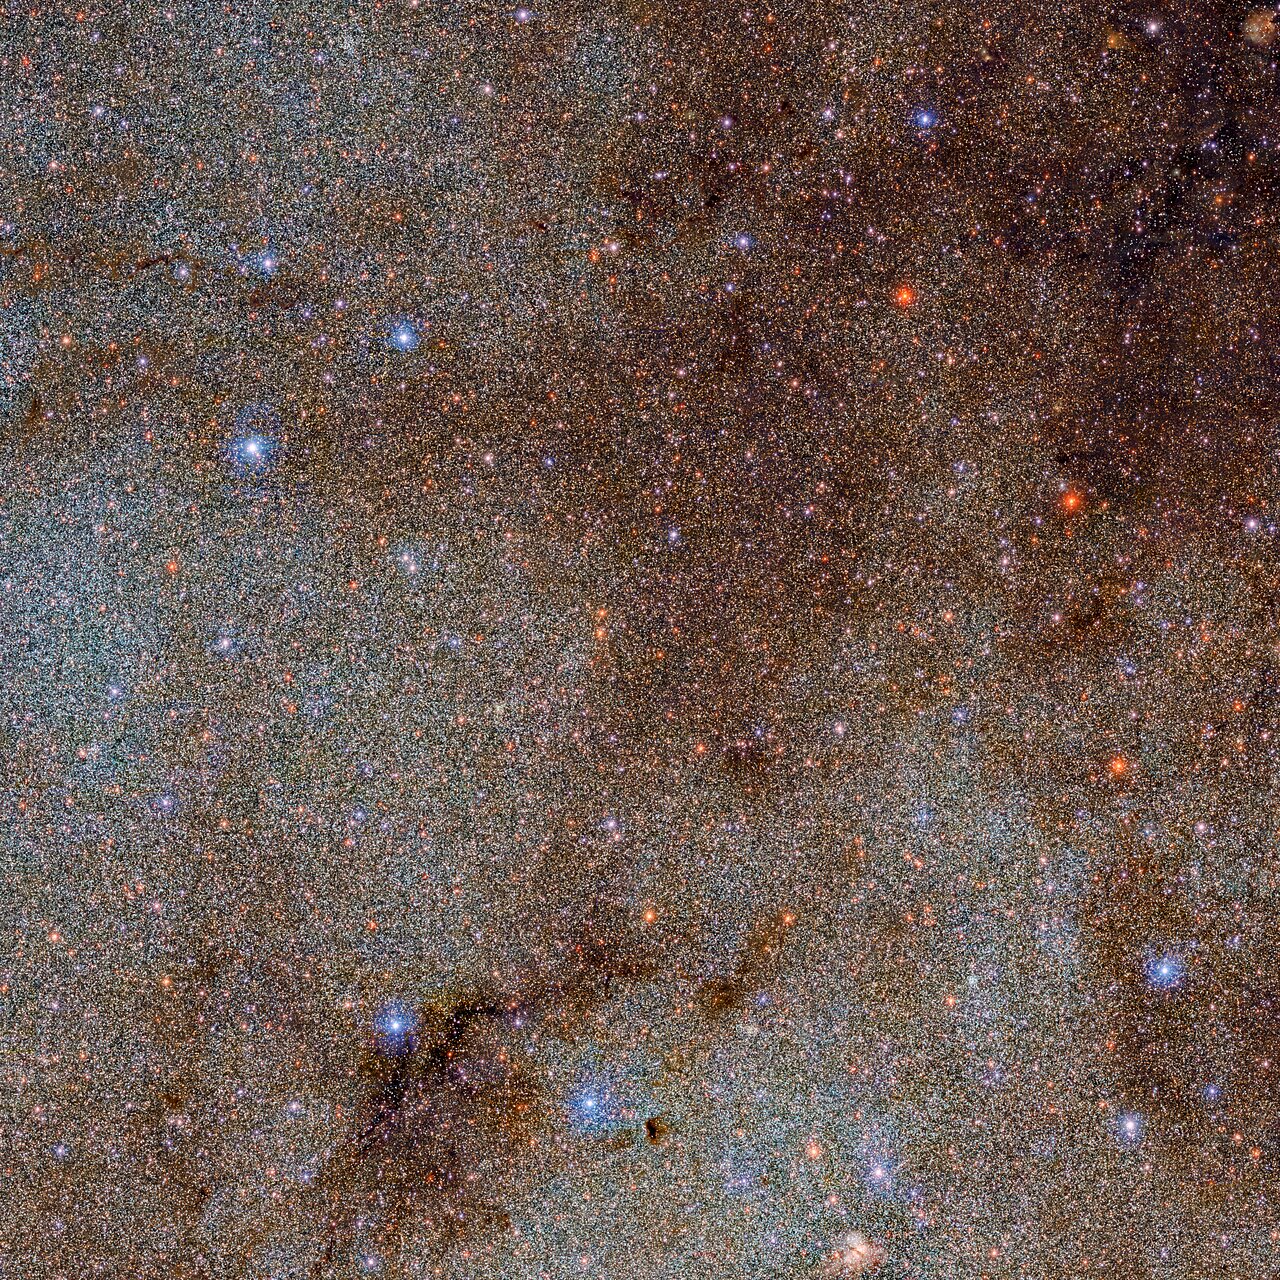 This image, which is full of stars and dark dust clouds, is just a small snippet – a pinhead!  – the entire DECaPS2 (Dark Energy Camera Plane Survey) study of the Milky Way. [M. Zamani & D. de Martin (NSF’s NOIRLab) - DECaPS2/DOE/FNAL/DECam/CTIO/NOIRLab/NSF/AURA]